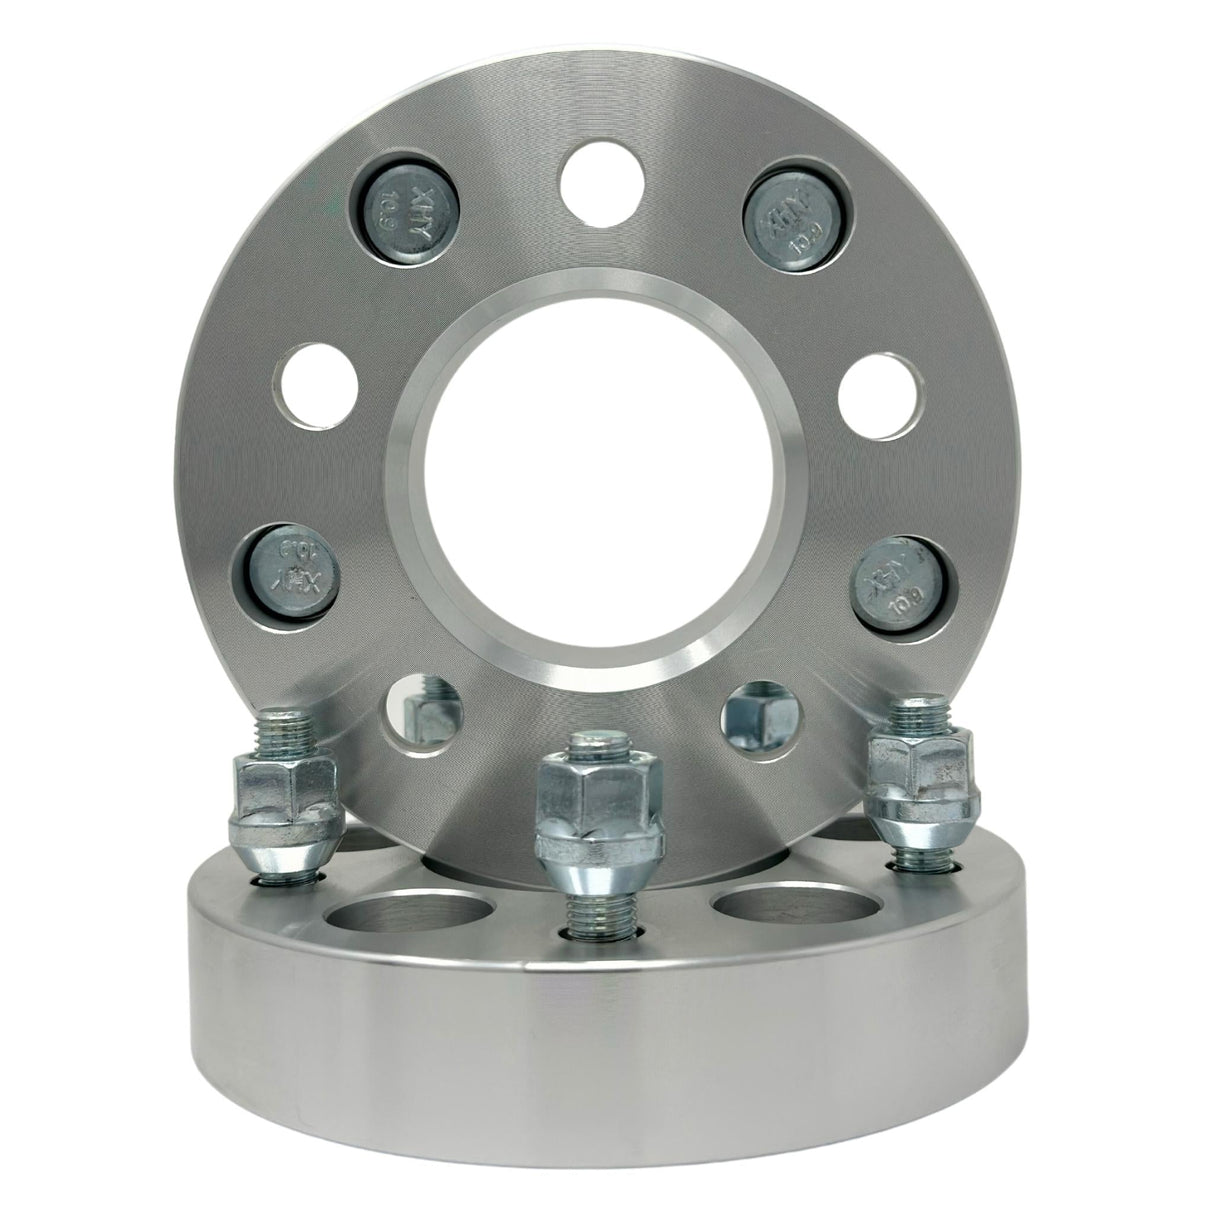 5x4.5 (5x114.3) Wheel Spacers Universal Kit 1" Inch & 1.25 Inch (25-32mm) 14x1.5 Studs & Lug Nuts 74mm Center Bore Fits Tesla